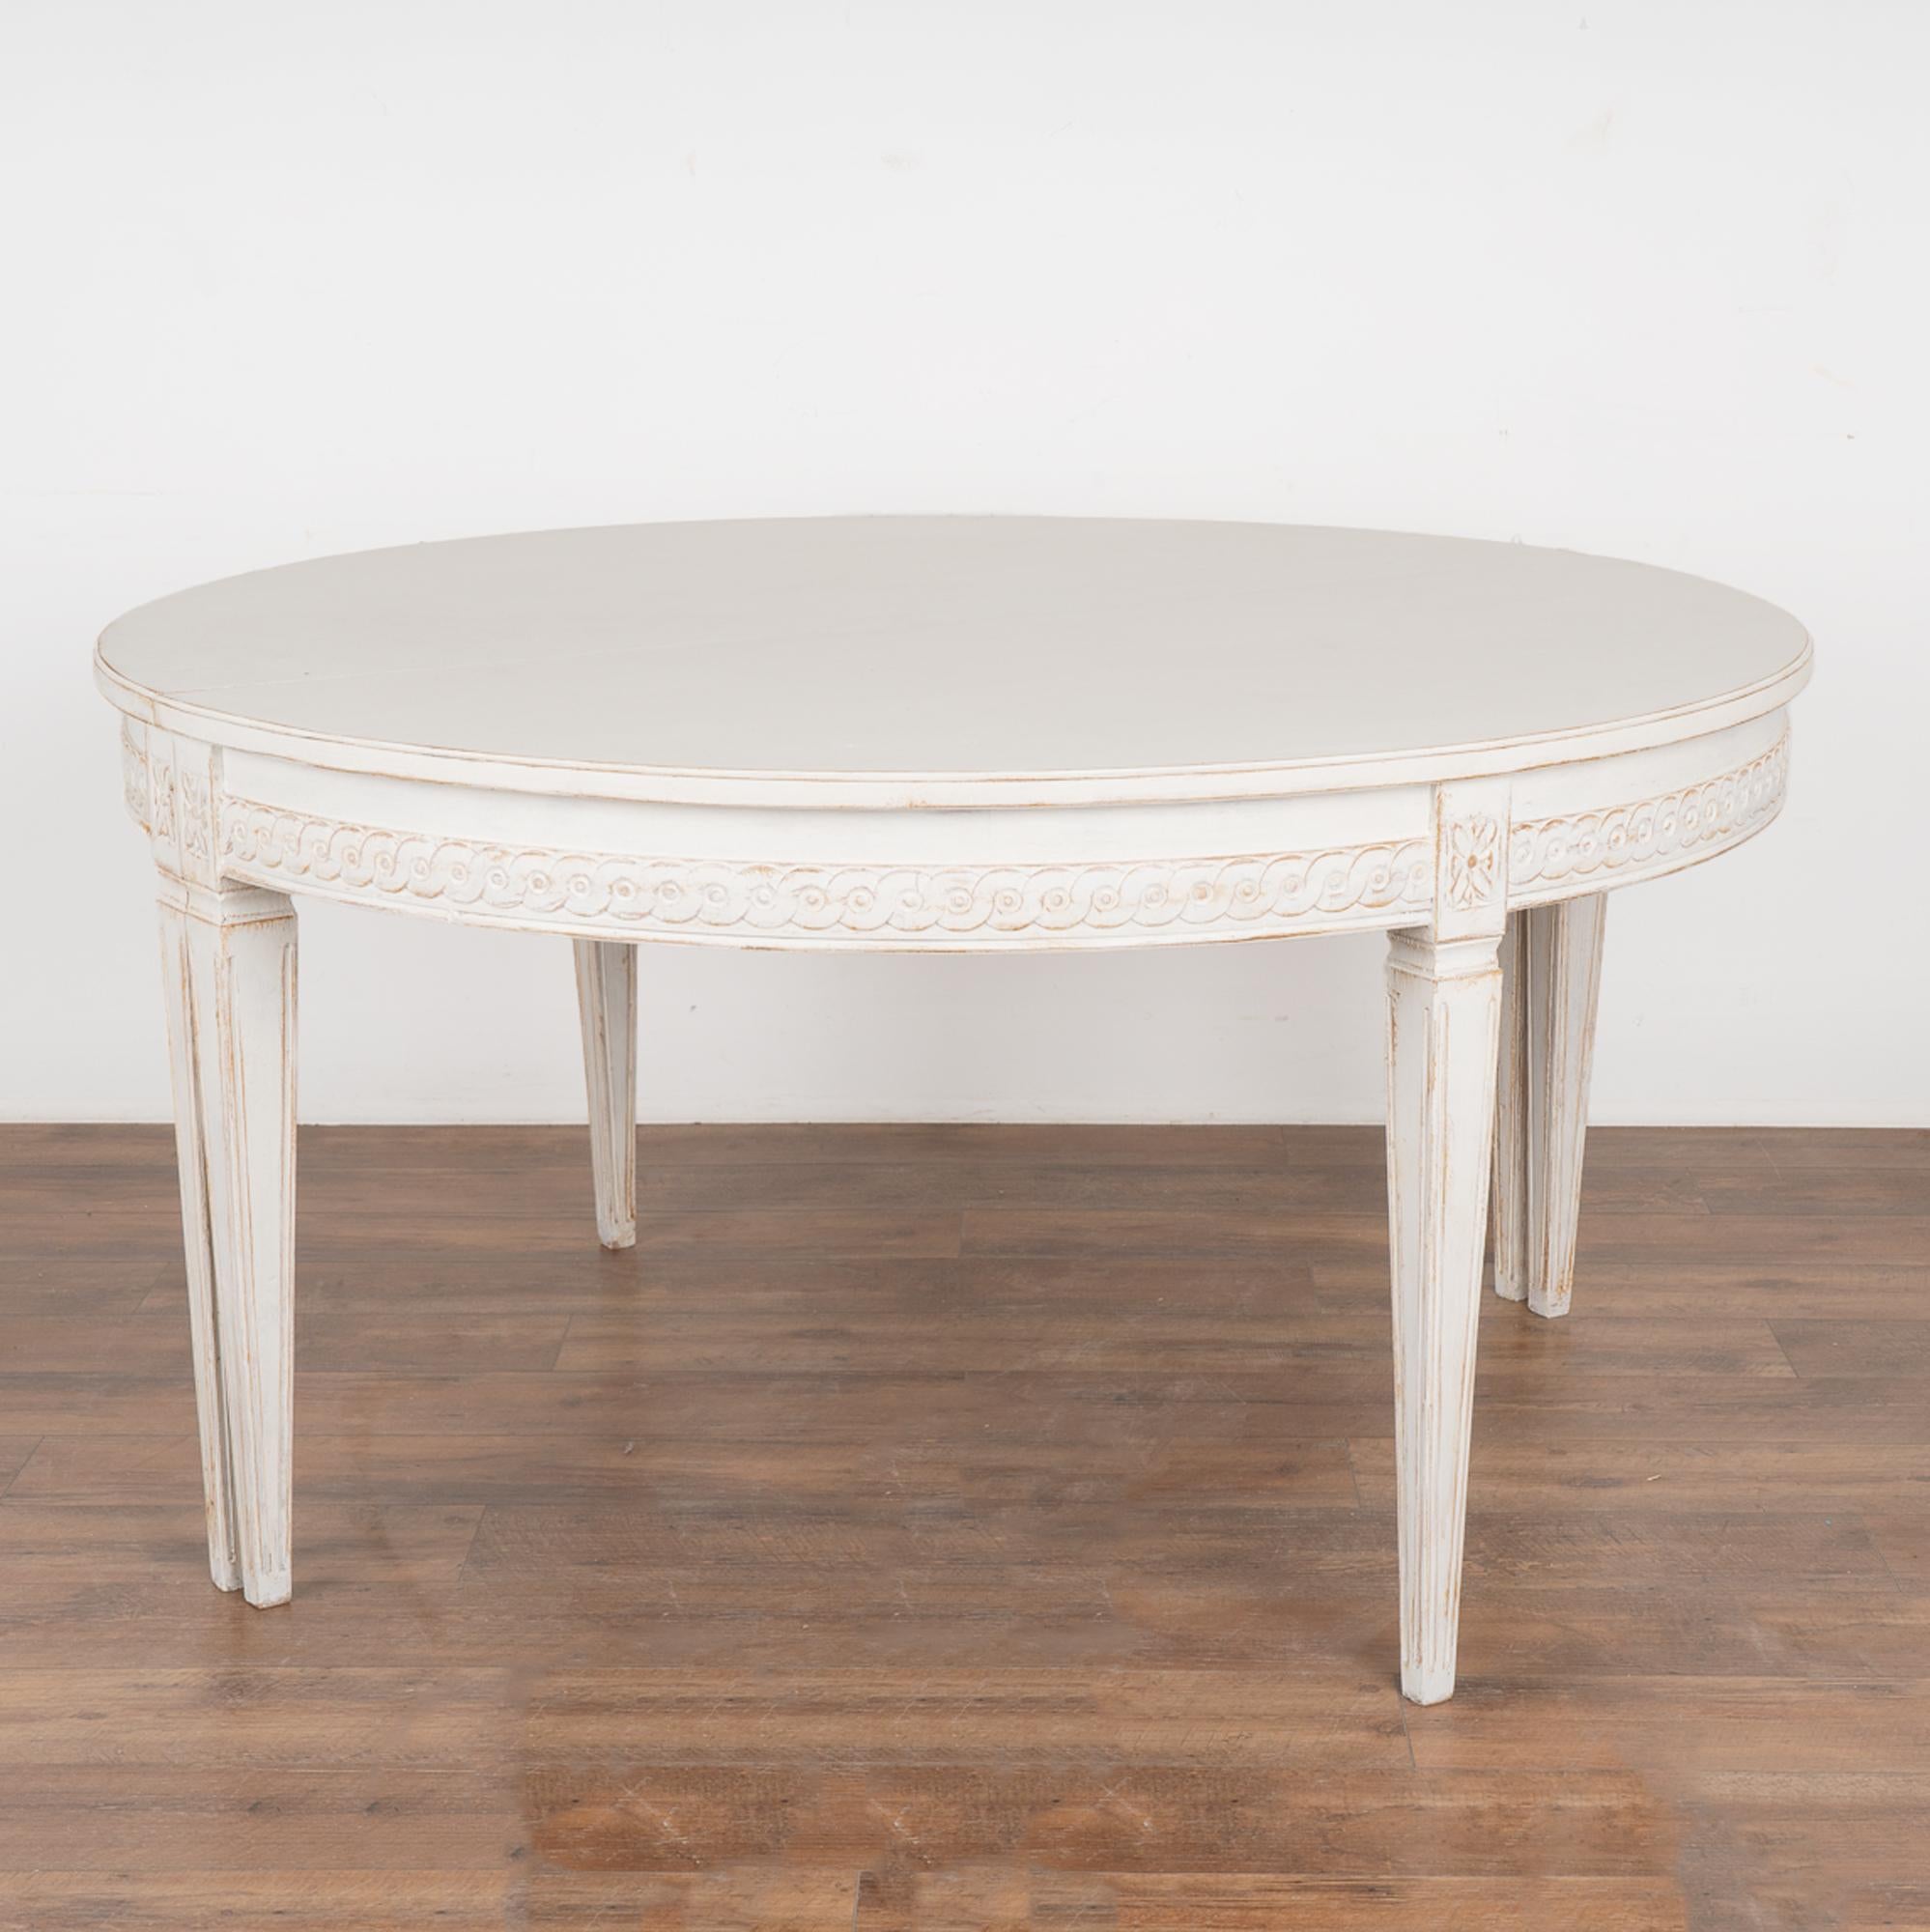 White Oval Dining Table With Three Leaves, Sweden circa 1860-80 For Sale 5